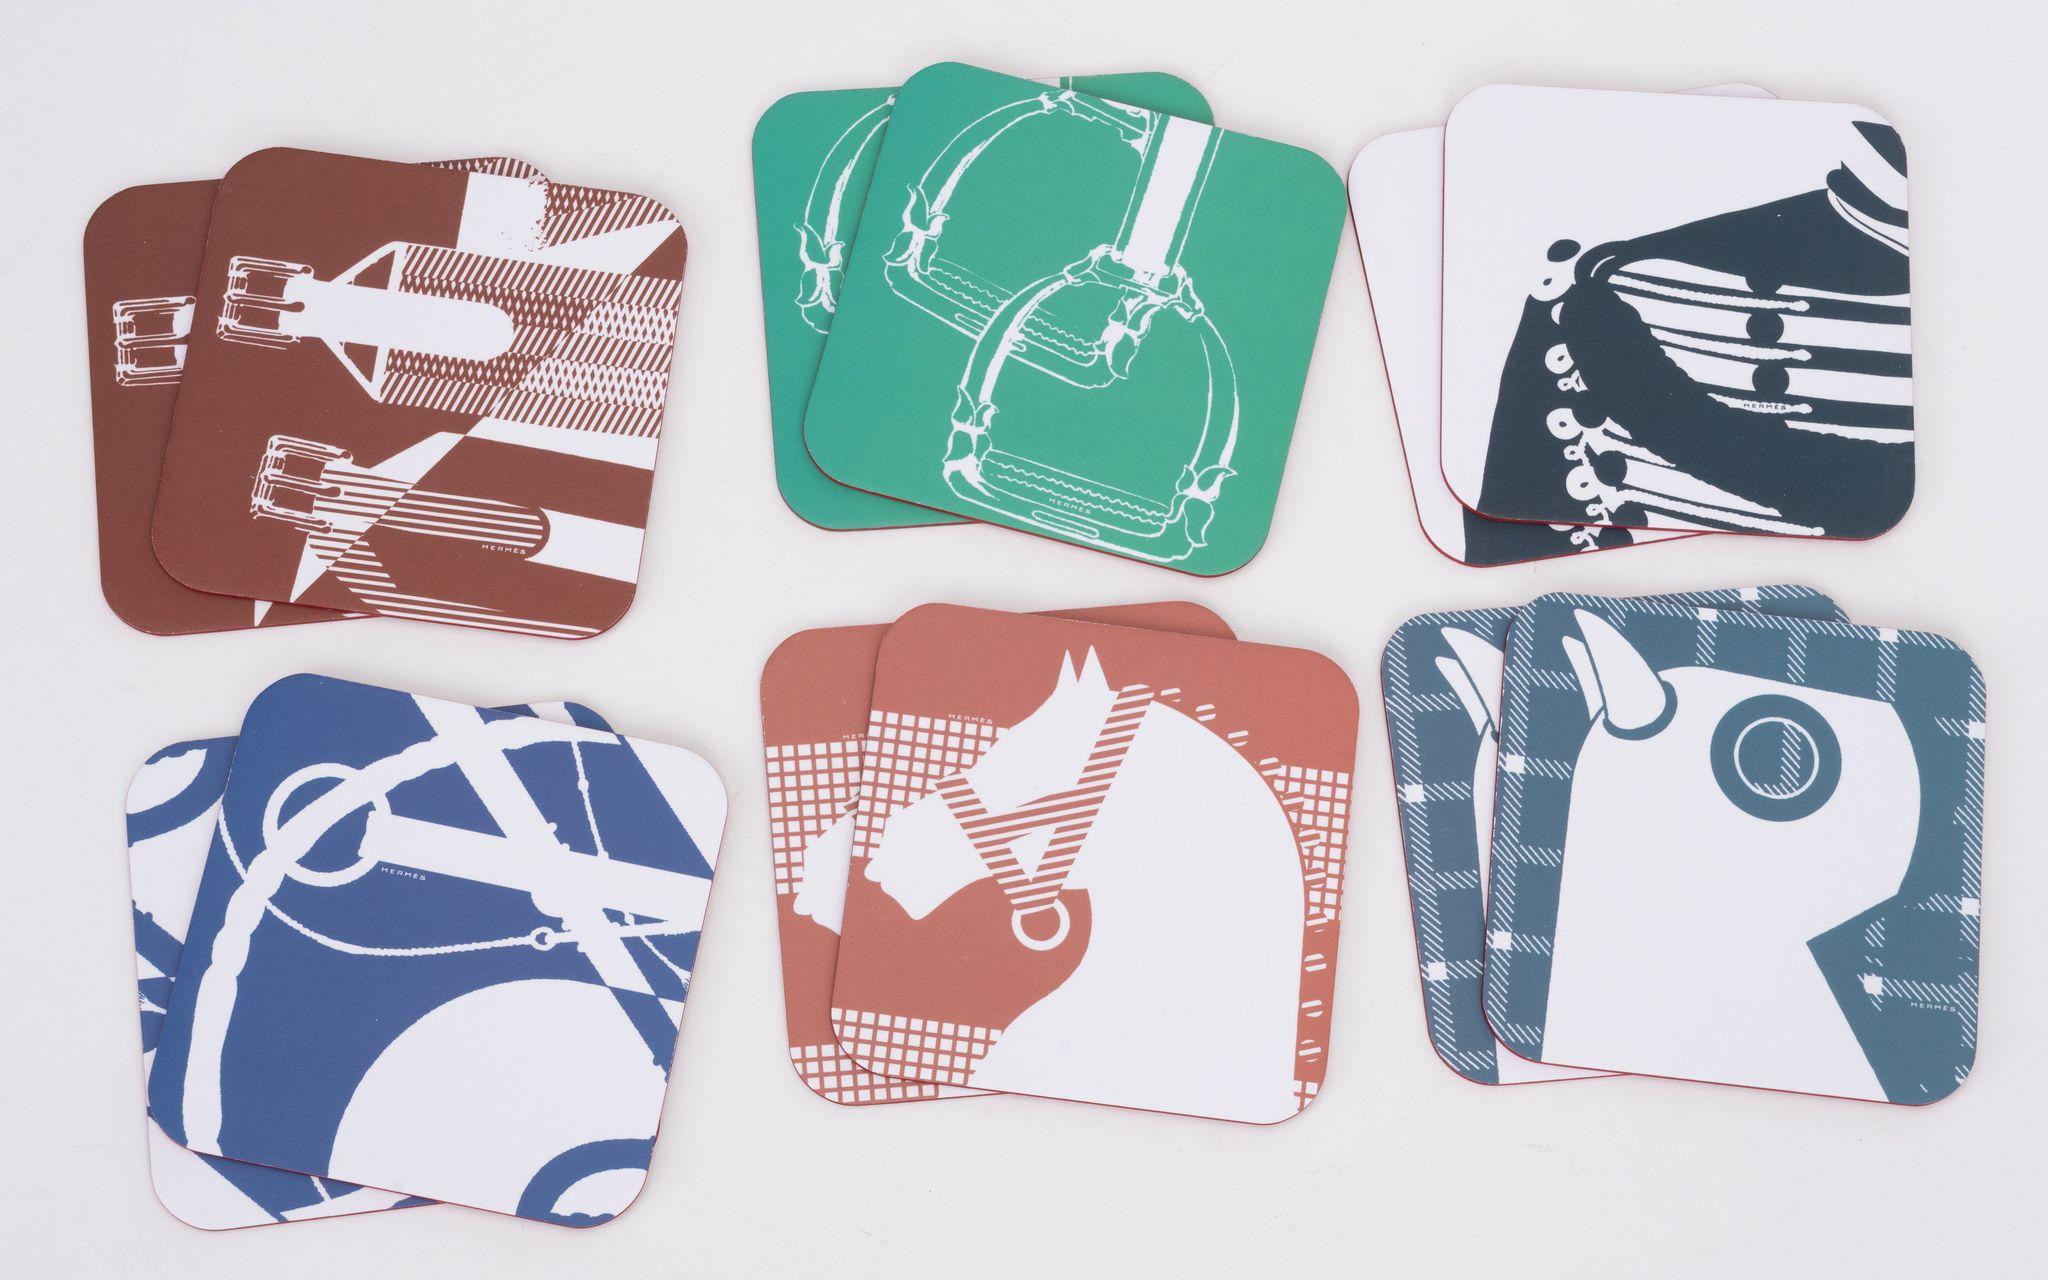 Hermès brand new set of 12 coasters, horse subjects in different colors. Comes with original box and ribbon.